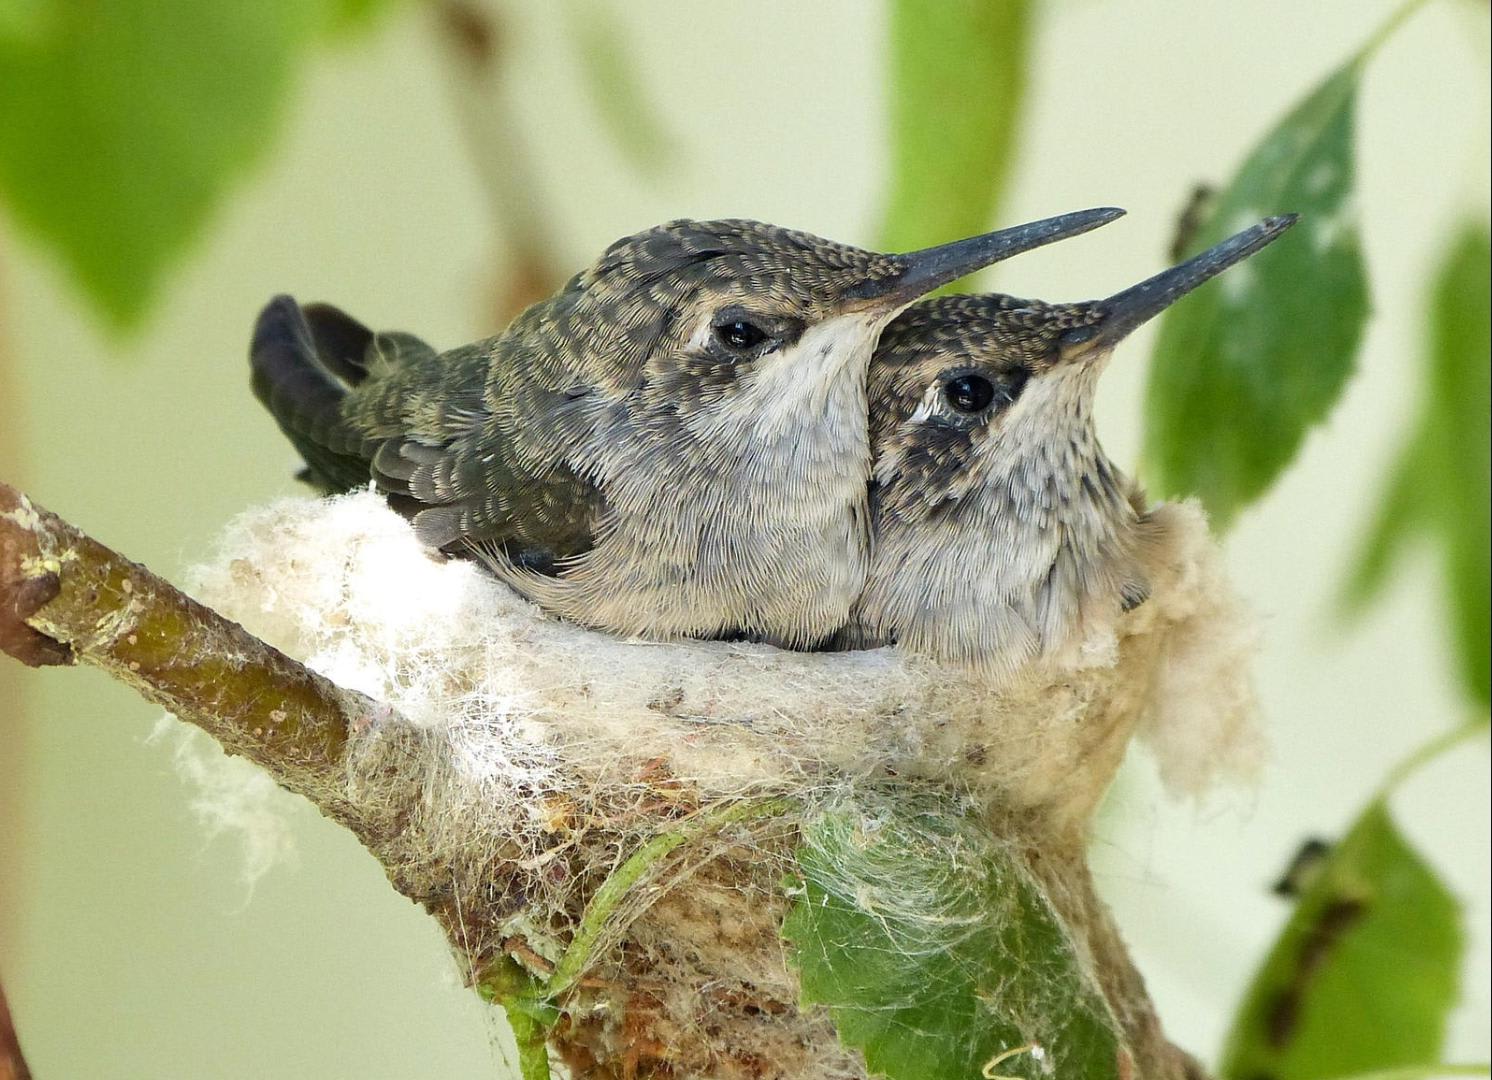 If you live in the Americas during spring time you may spot hummingbirds collecting cob webs. They use this sticky silk as a building material to firmly secure their nests to their choosen tree branch.